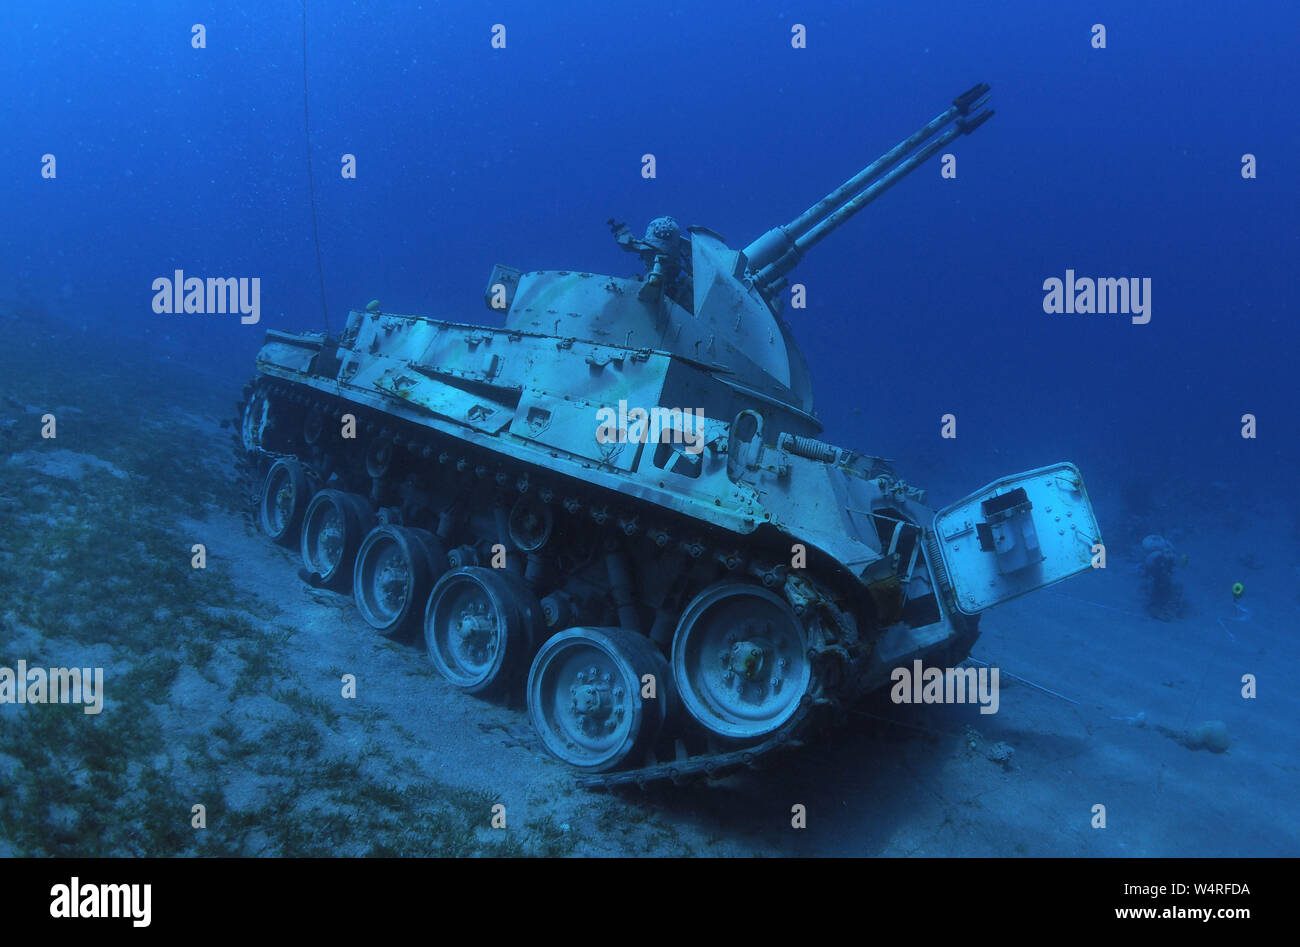 (190725) -- BEIJING, July 25, 2019 (Xinhua) -- Handout photo obtained on July 23, 2019 shows a Jordanian Armed Forces armoured vehicle lying on the seabed of the Red Sea as part of a new underwater military museum off the coast of the southern port city of Aqaba, Jordan. The museum is built by Aqaba Special Economic Zone to attract more tourists in summer. (Aqaba Special Economic Zone/Handout via Xinhua) Stock Photo